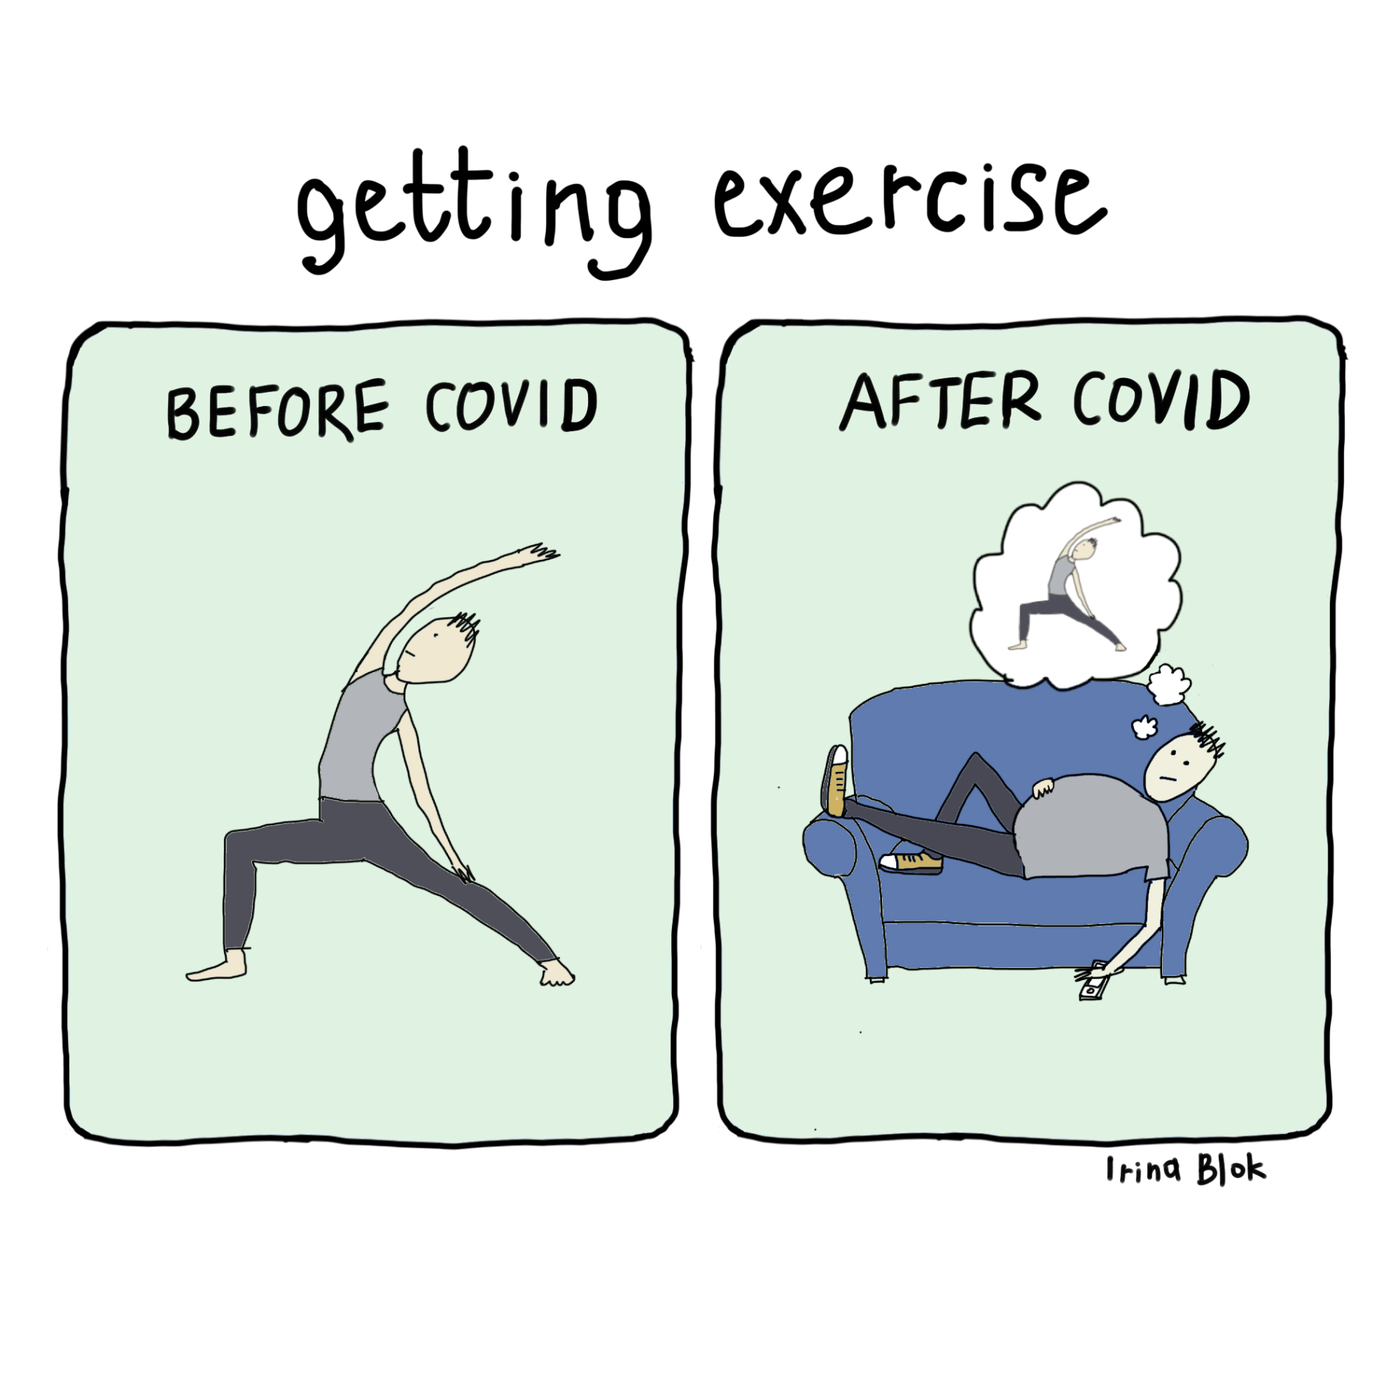 getting exercise

BEFORE COVID AFTER CoVID

 

Irina Blok